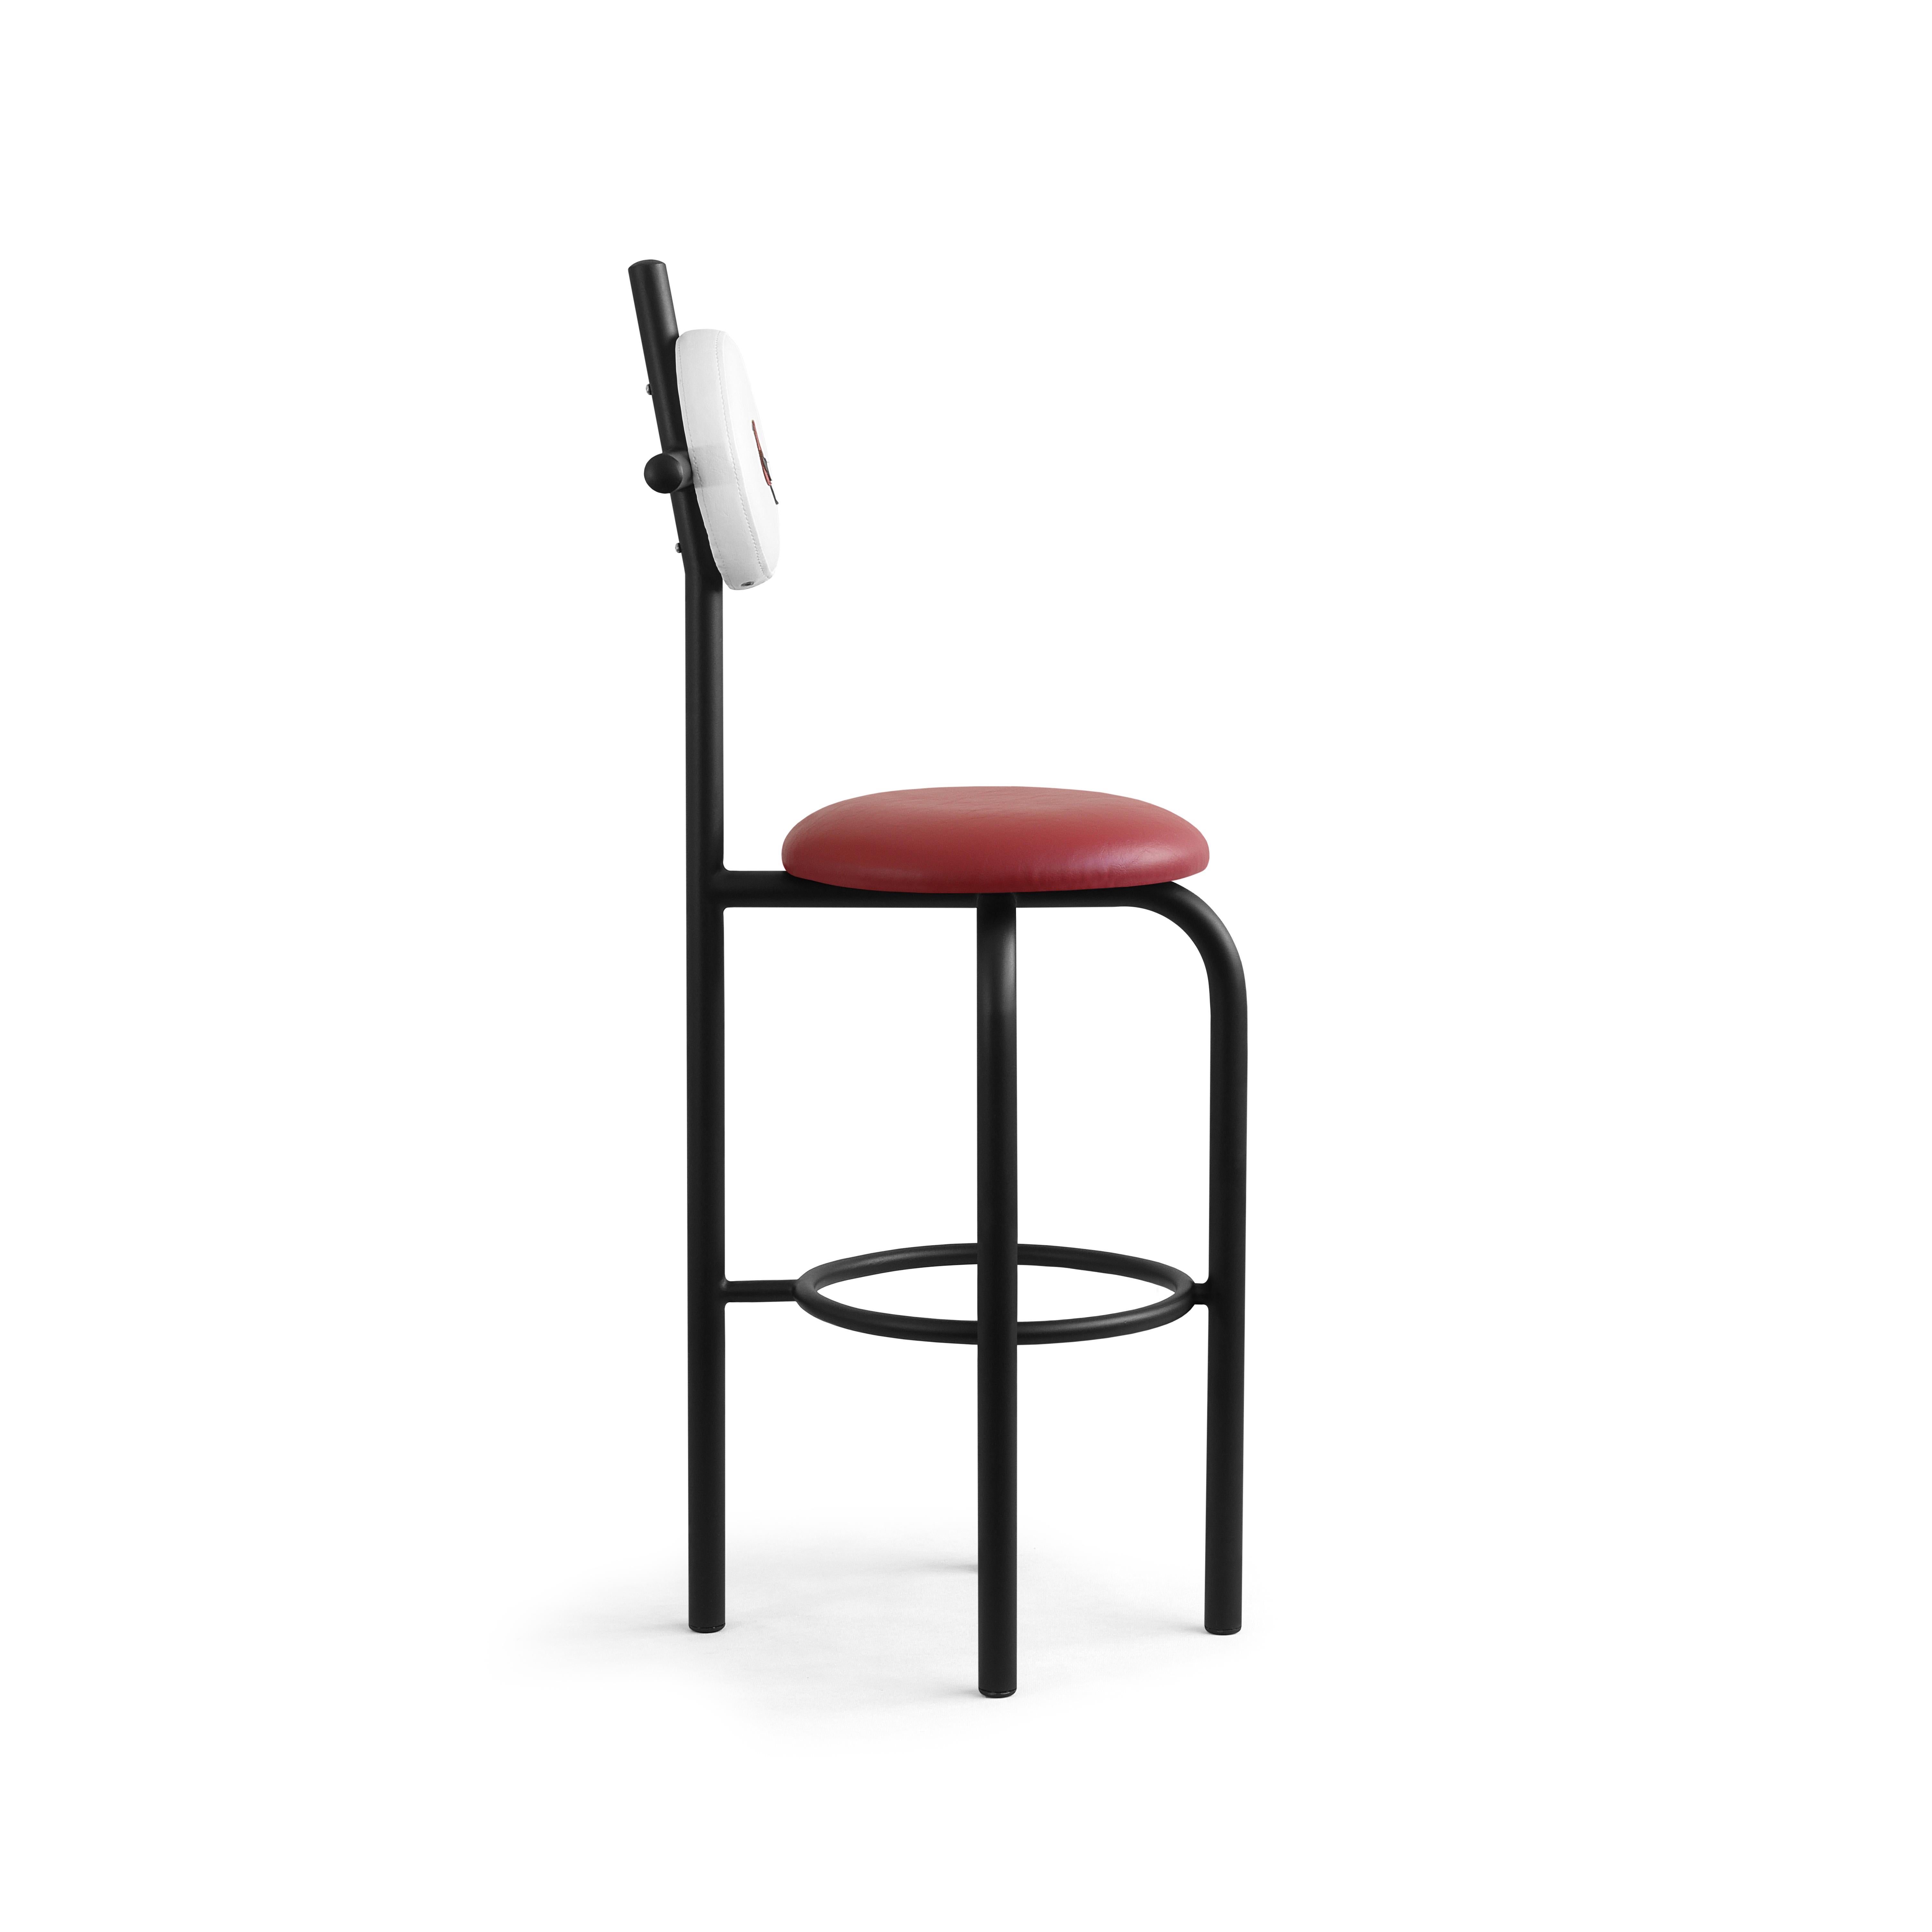 Appliqué PK19 Impermeable Bar Stool, Red Seat & Black Metal Structure by Paulo Kobylka For Sale